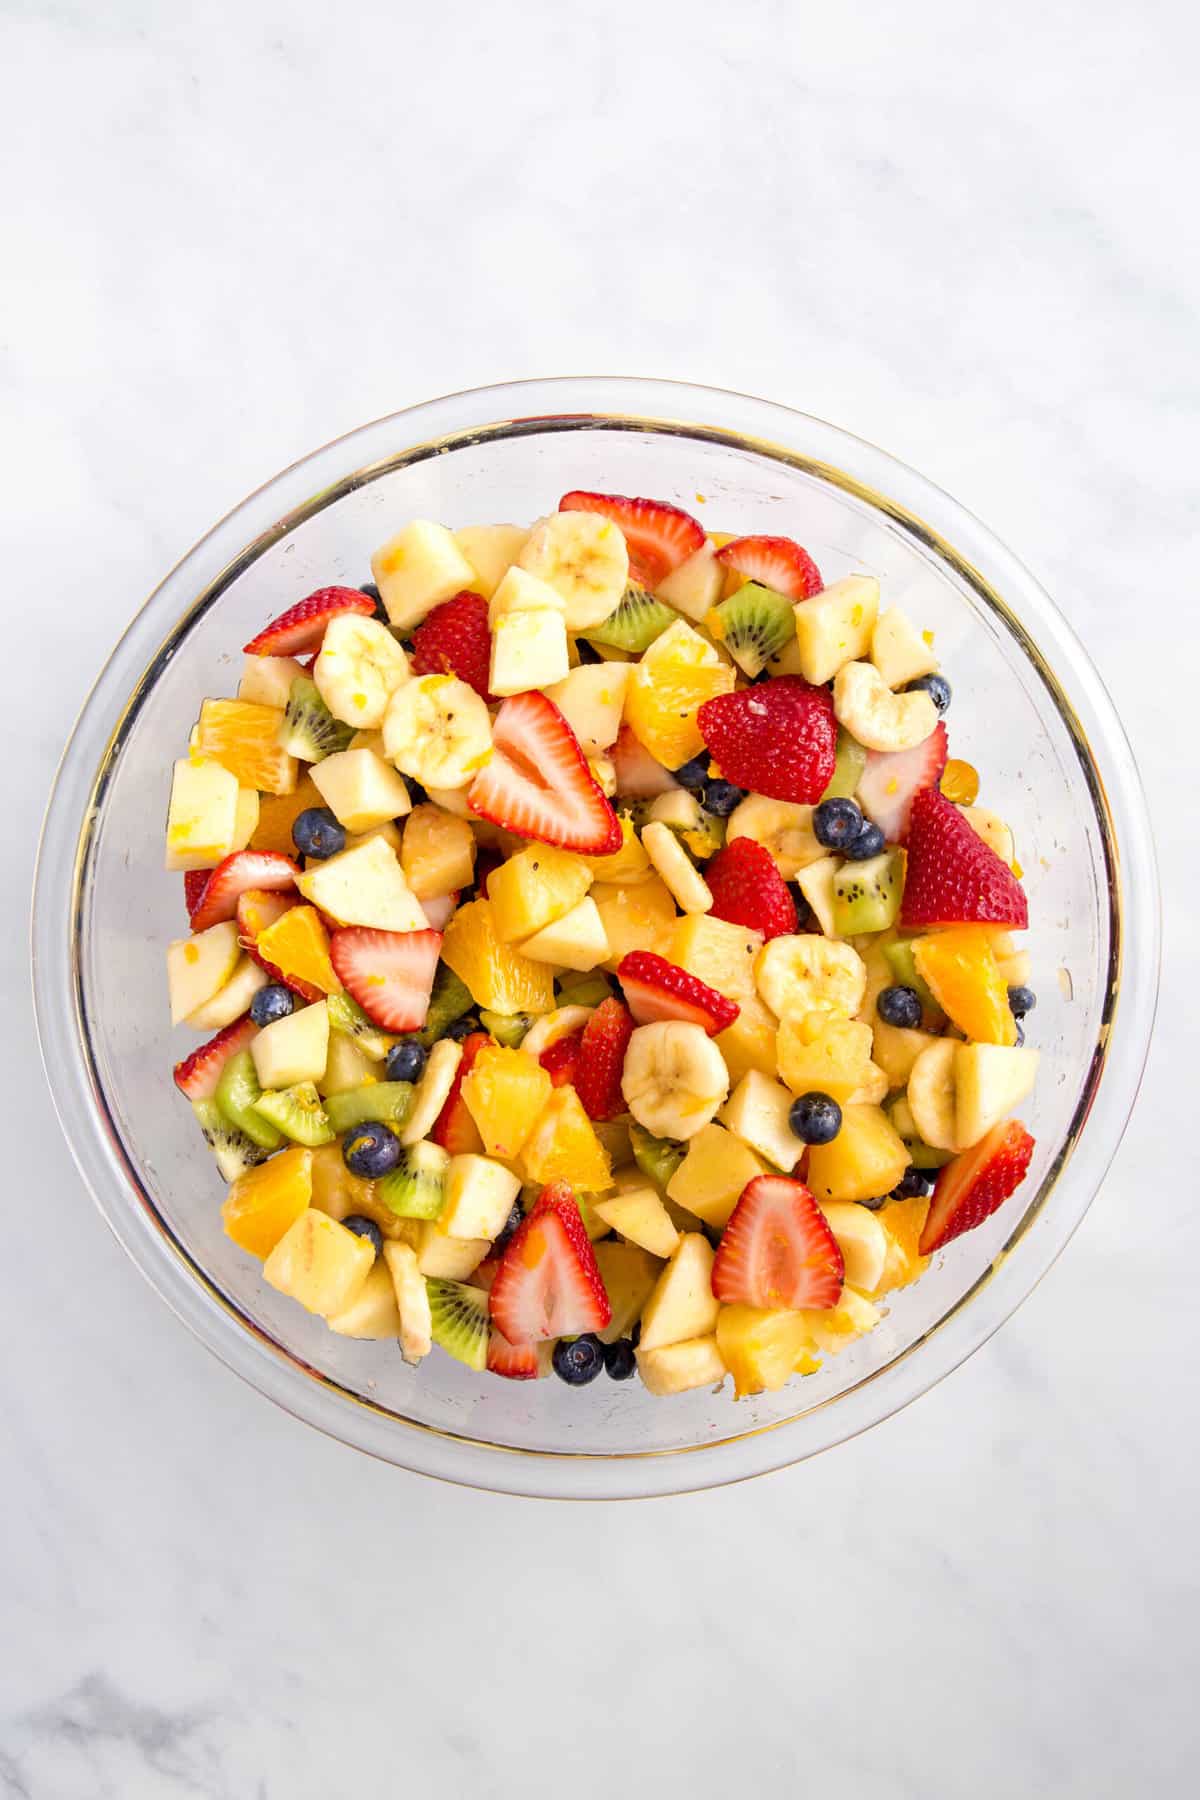 cut up strawberries, bananas, kiwi, oranges, pineapple, and fresh blueberries tossed in dressing served in a large glass bowl